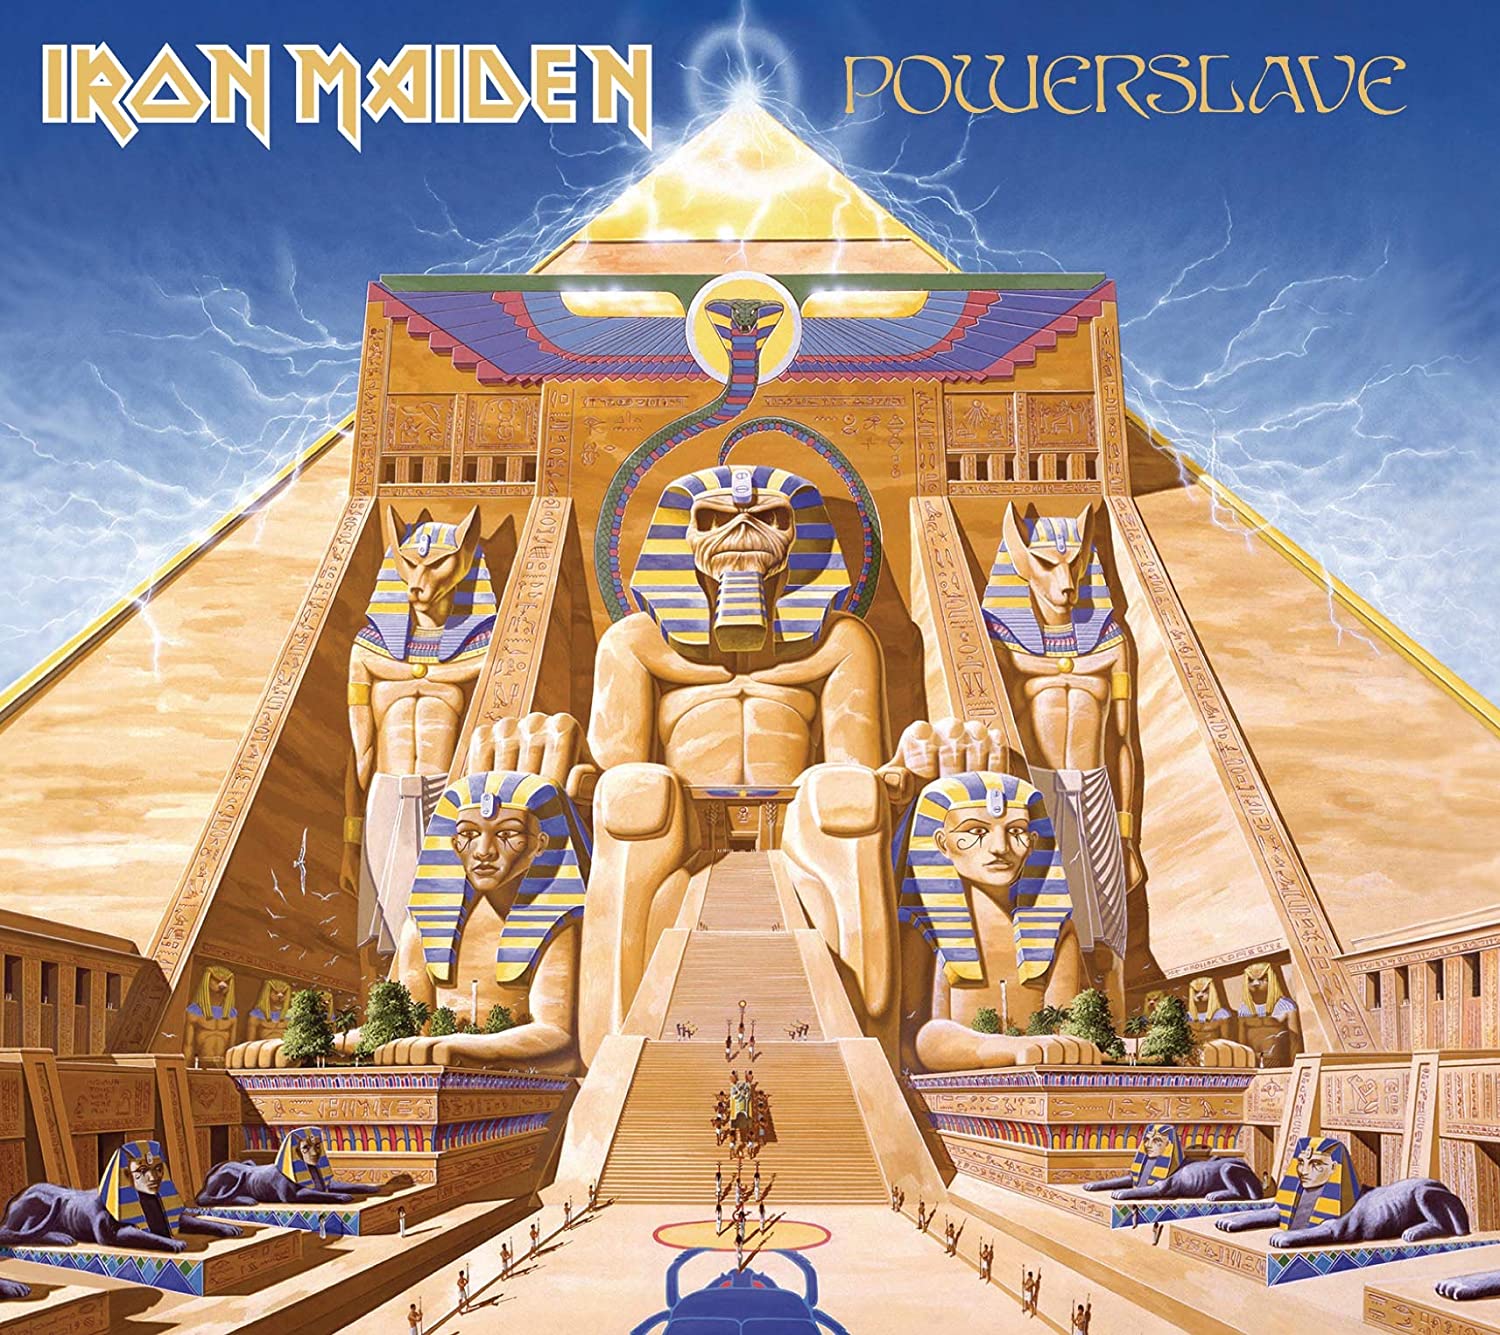 5. “2 Minutes To Midnight” from ‘Powerslave’ (1984)